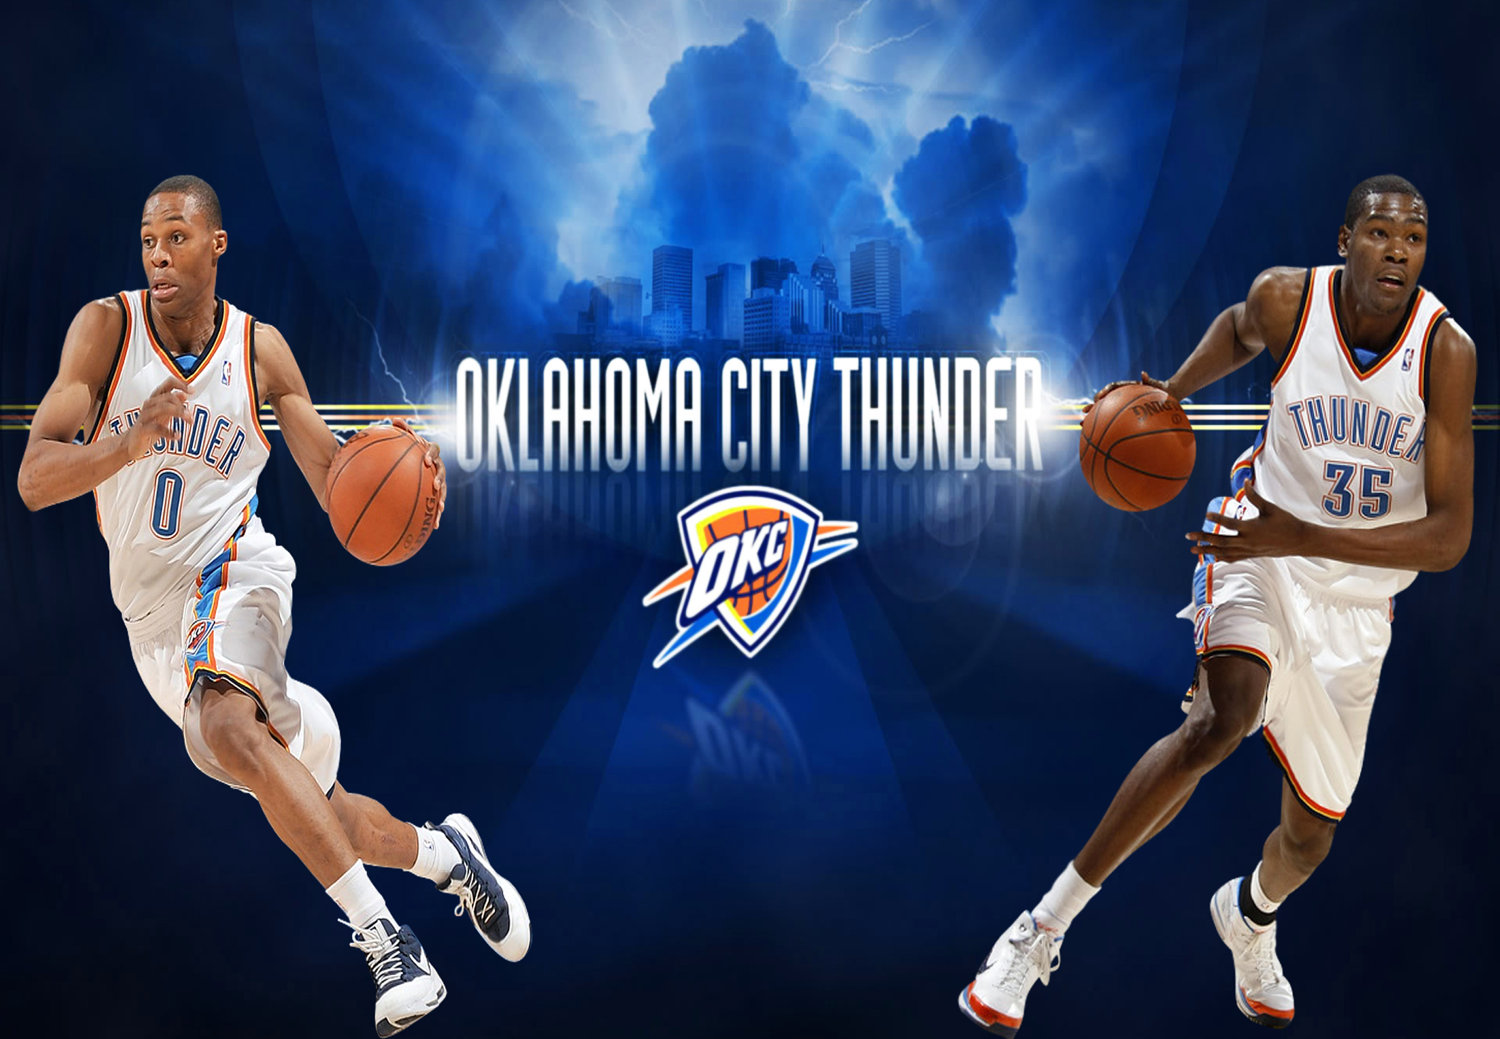 Okc Thunder Kevin Durant And Russell Westbrook Wallpaper